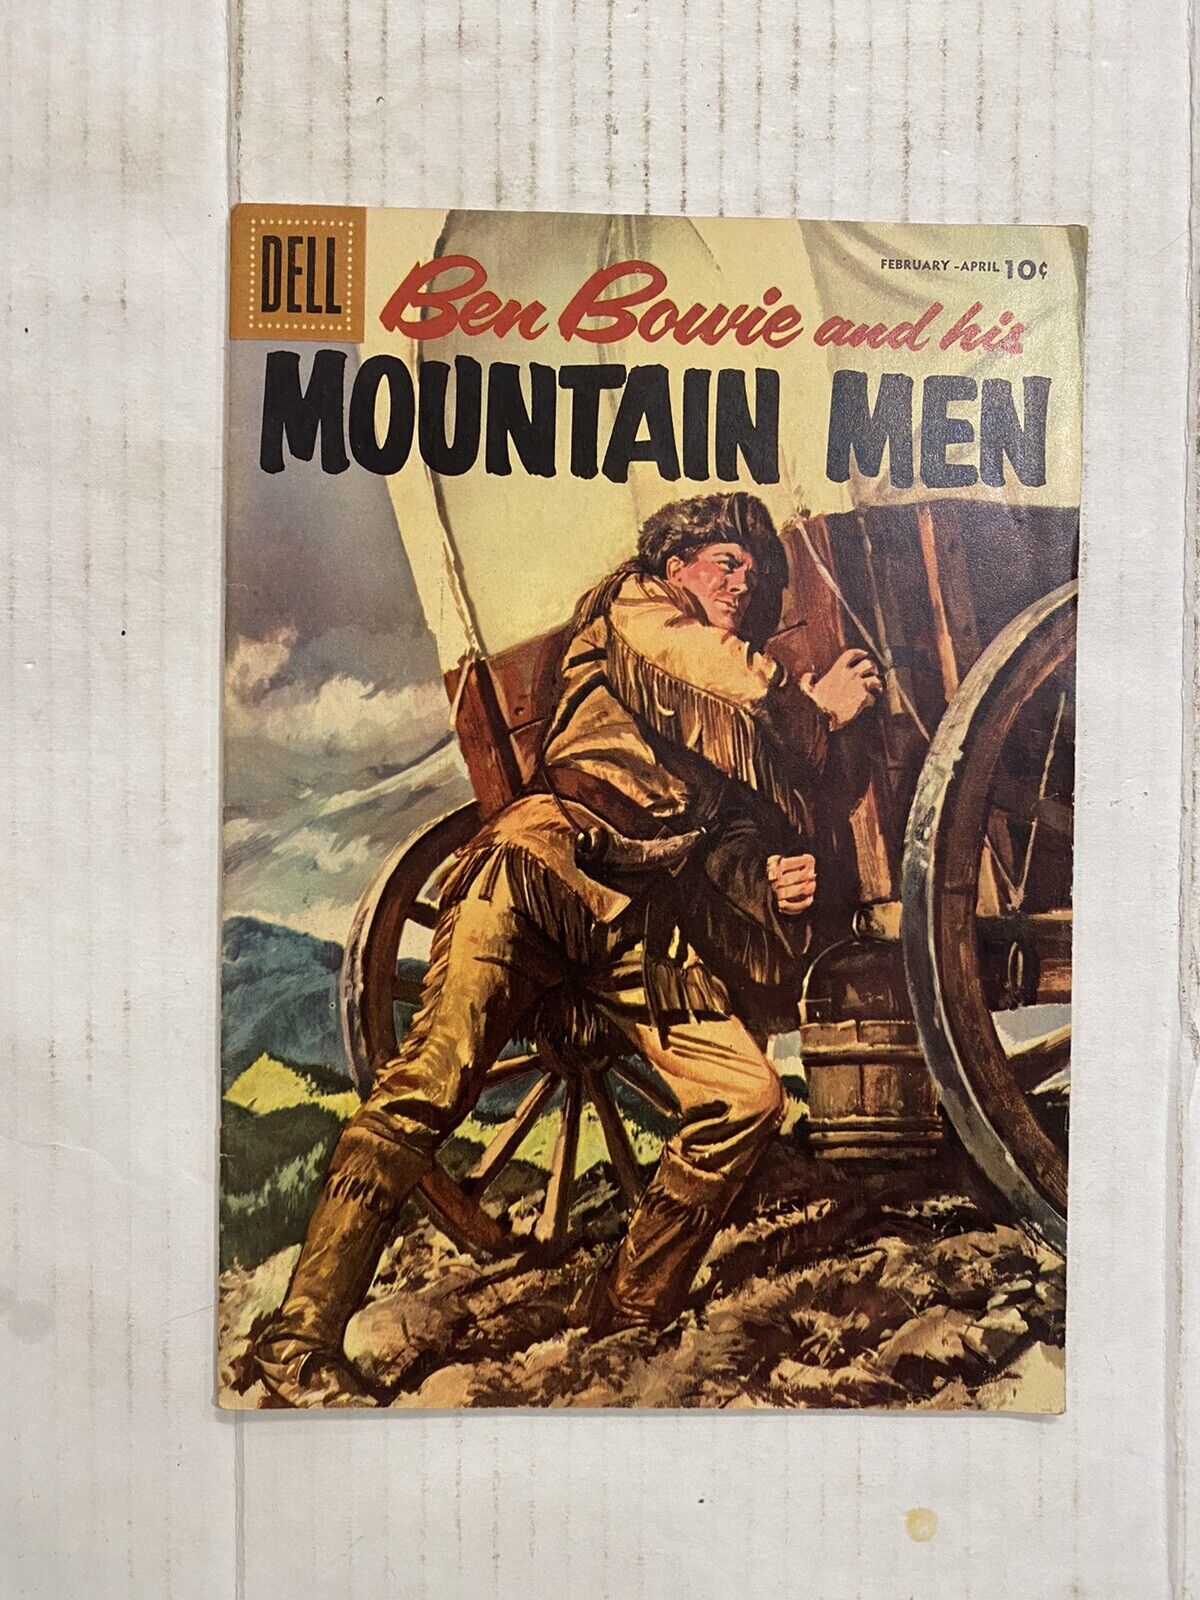 Ben Bowie and His Mountain Men #10 (1956) DELL COMICS